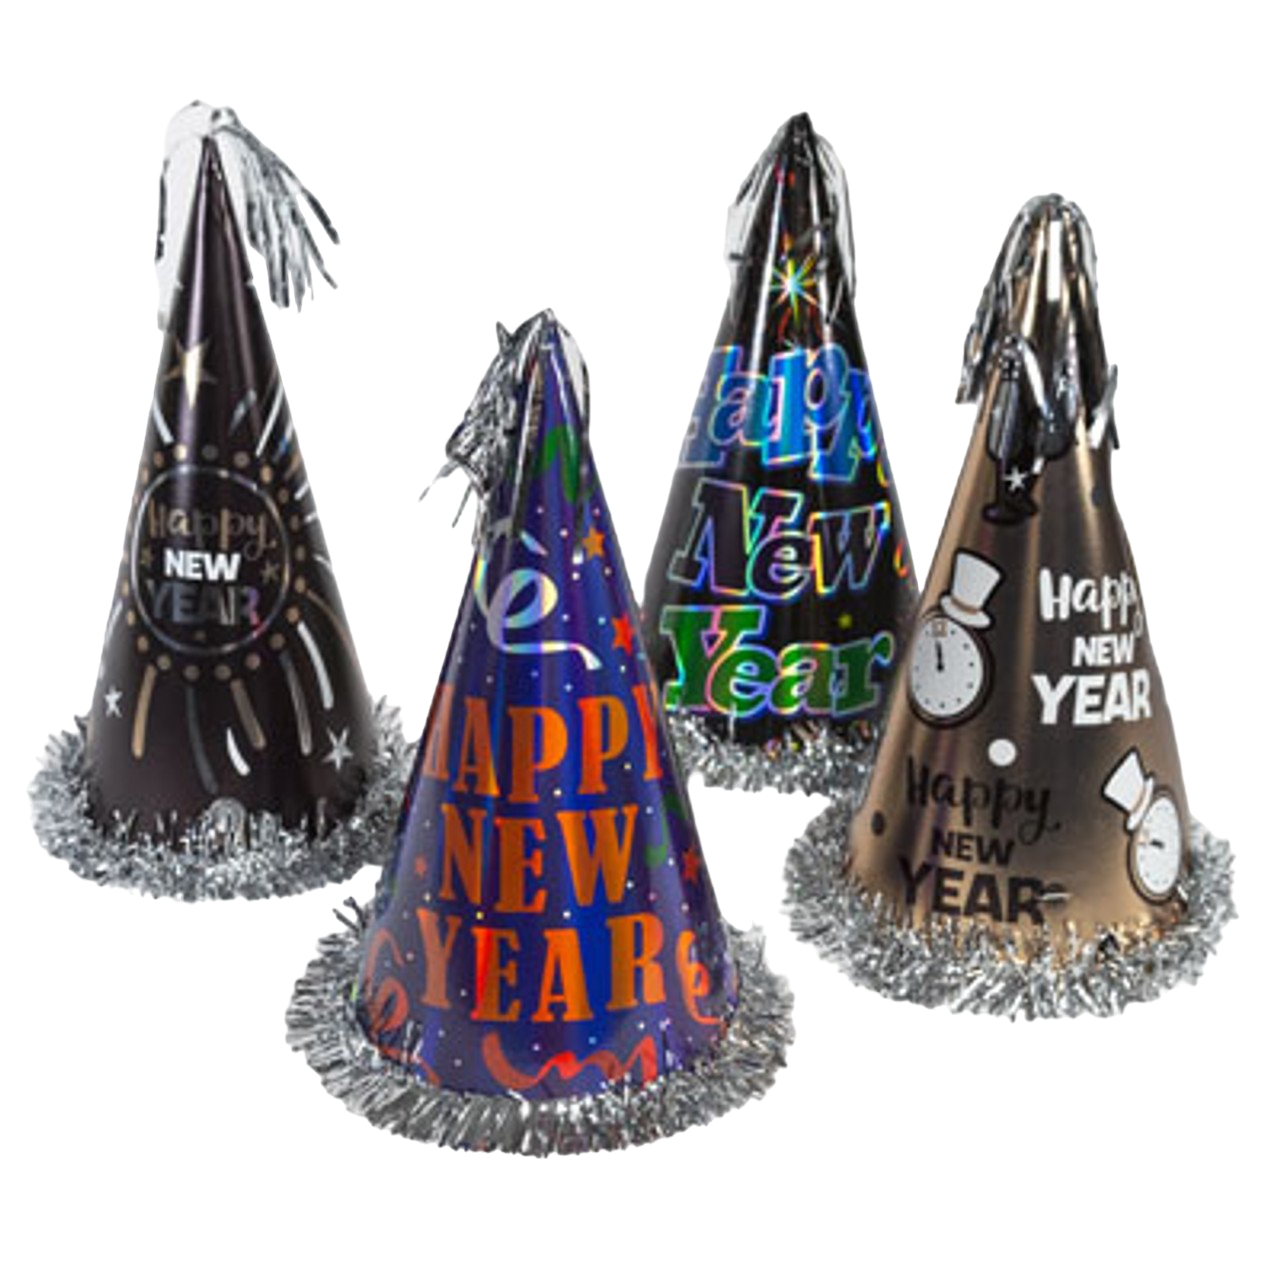 REGENT HAPPY NEW YEAR PARTY HAT 12.5in